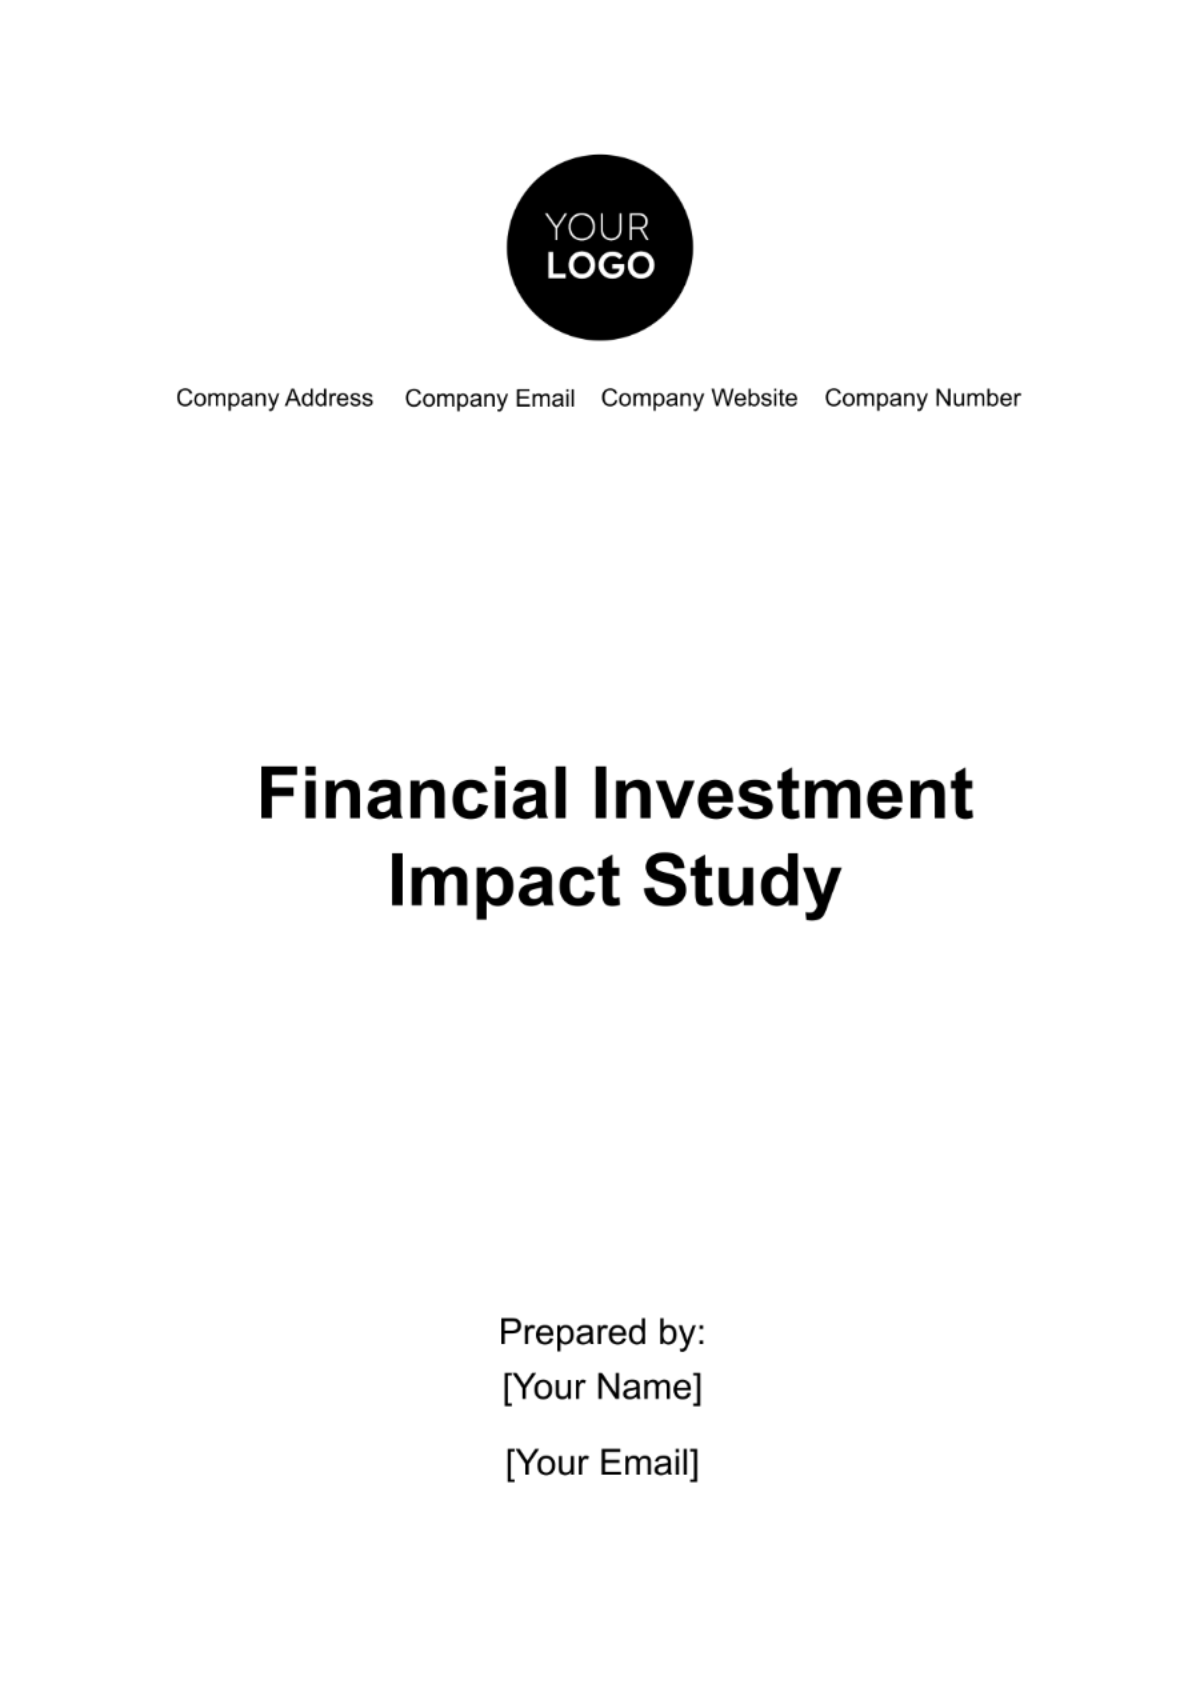 Financial Investment Impact Study Template